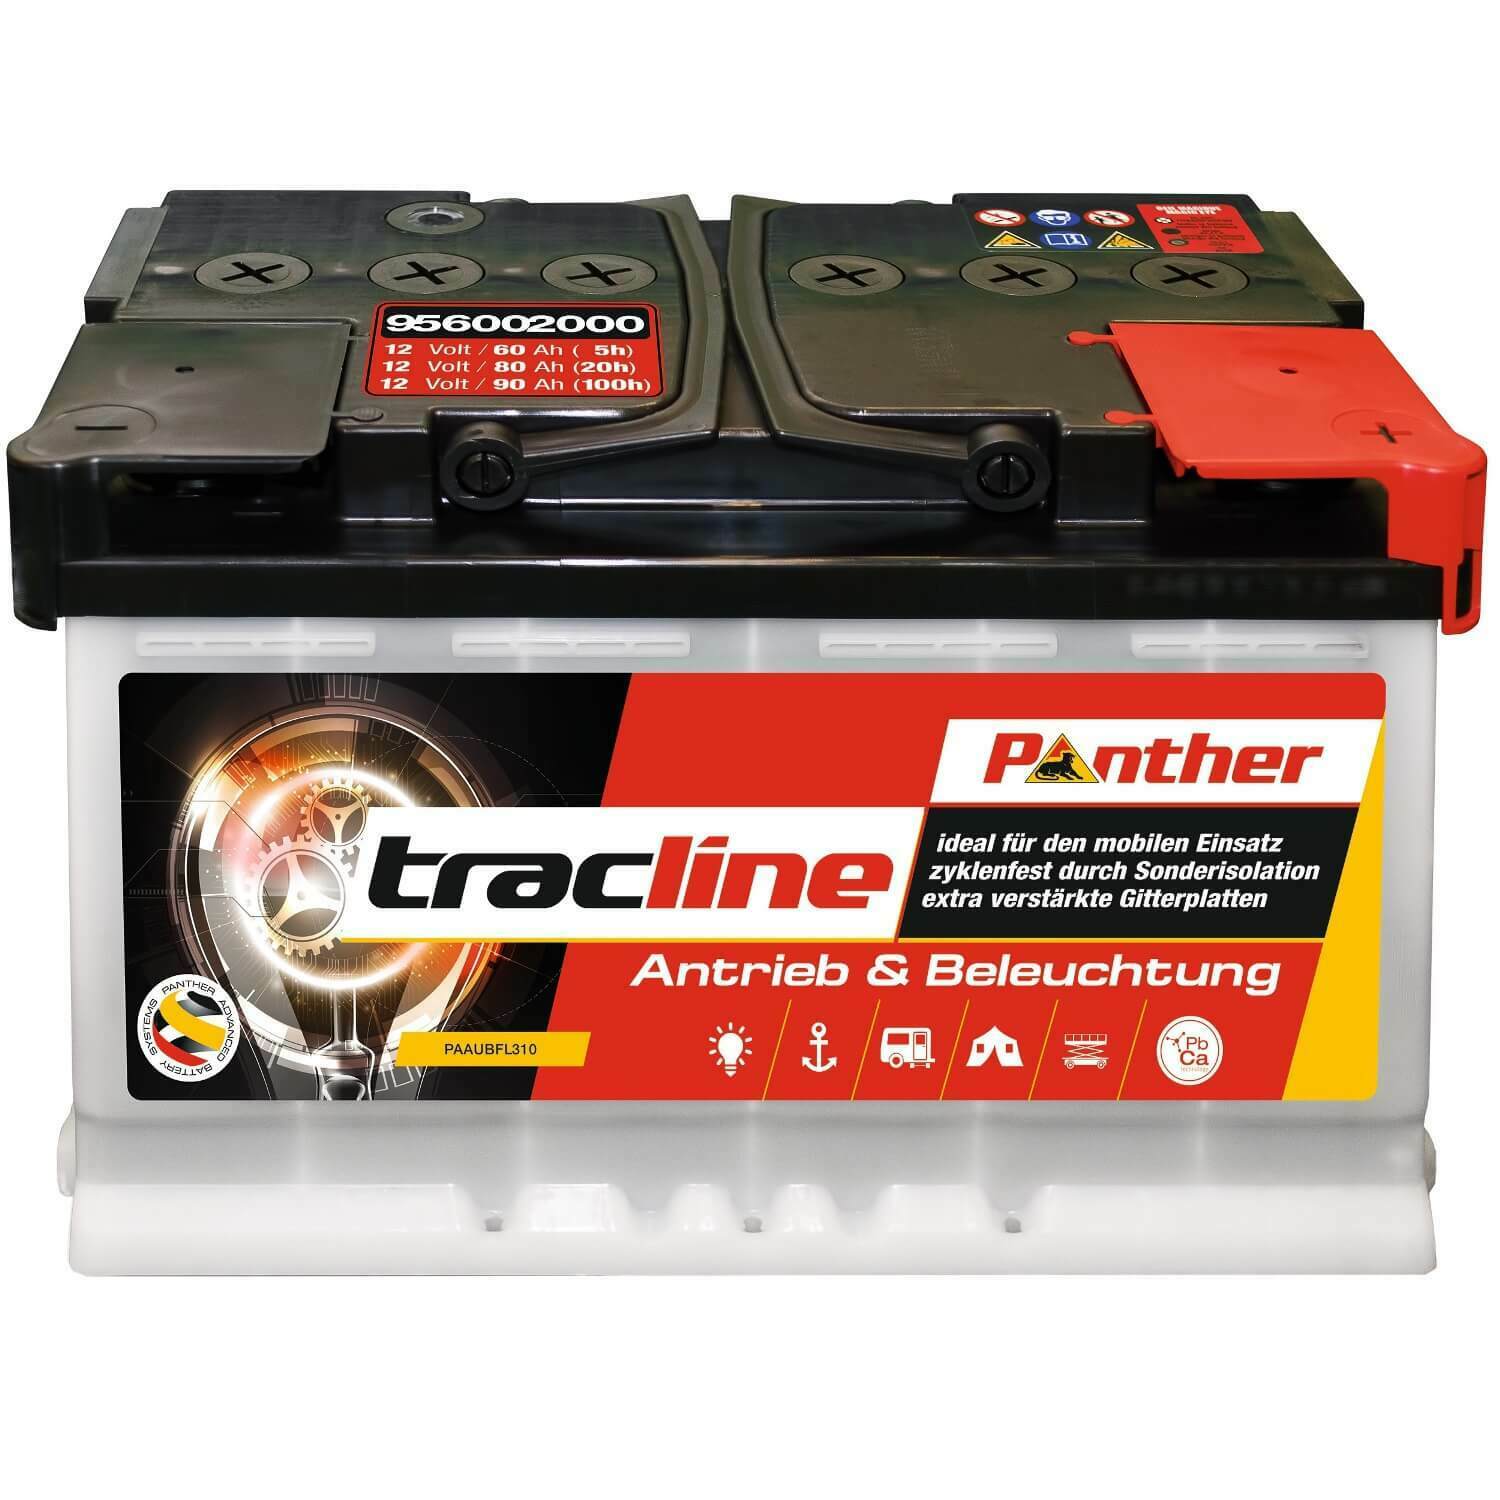 Panther tracline 12 V / 90 Ah (C20) 95752 zyklenfest